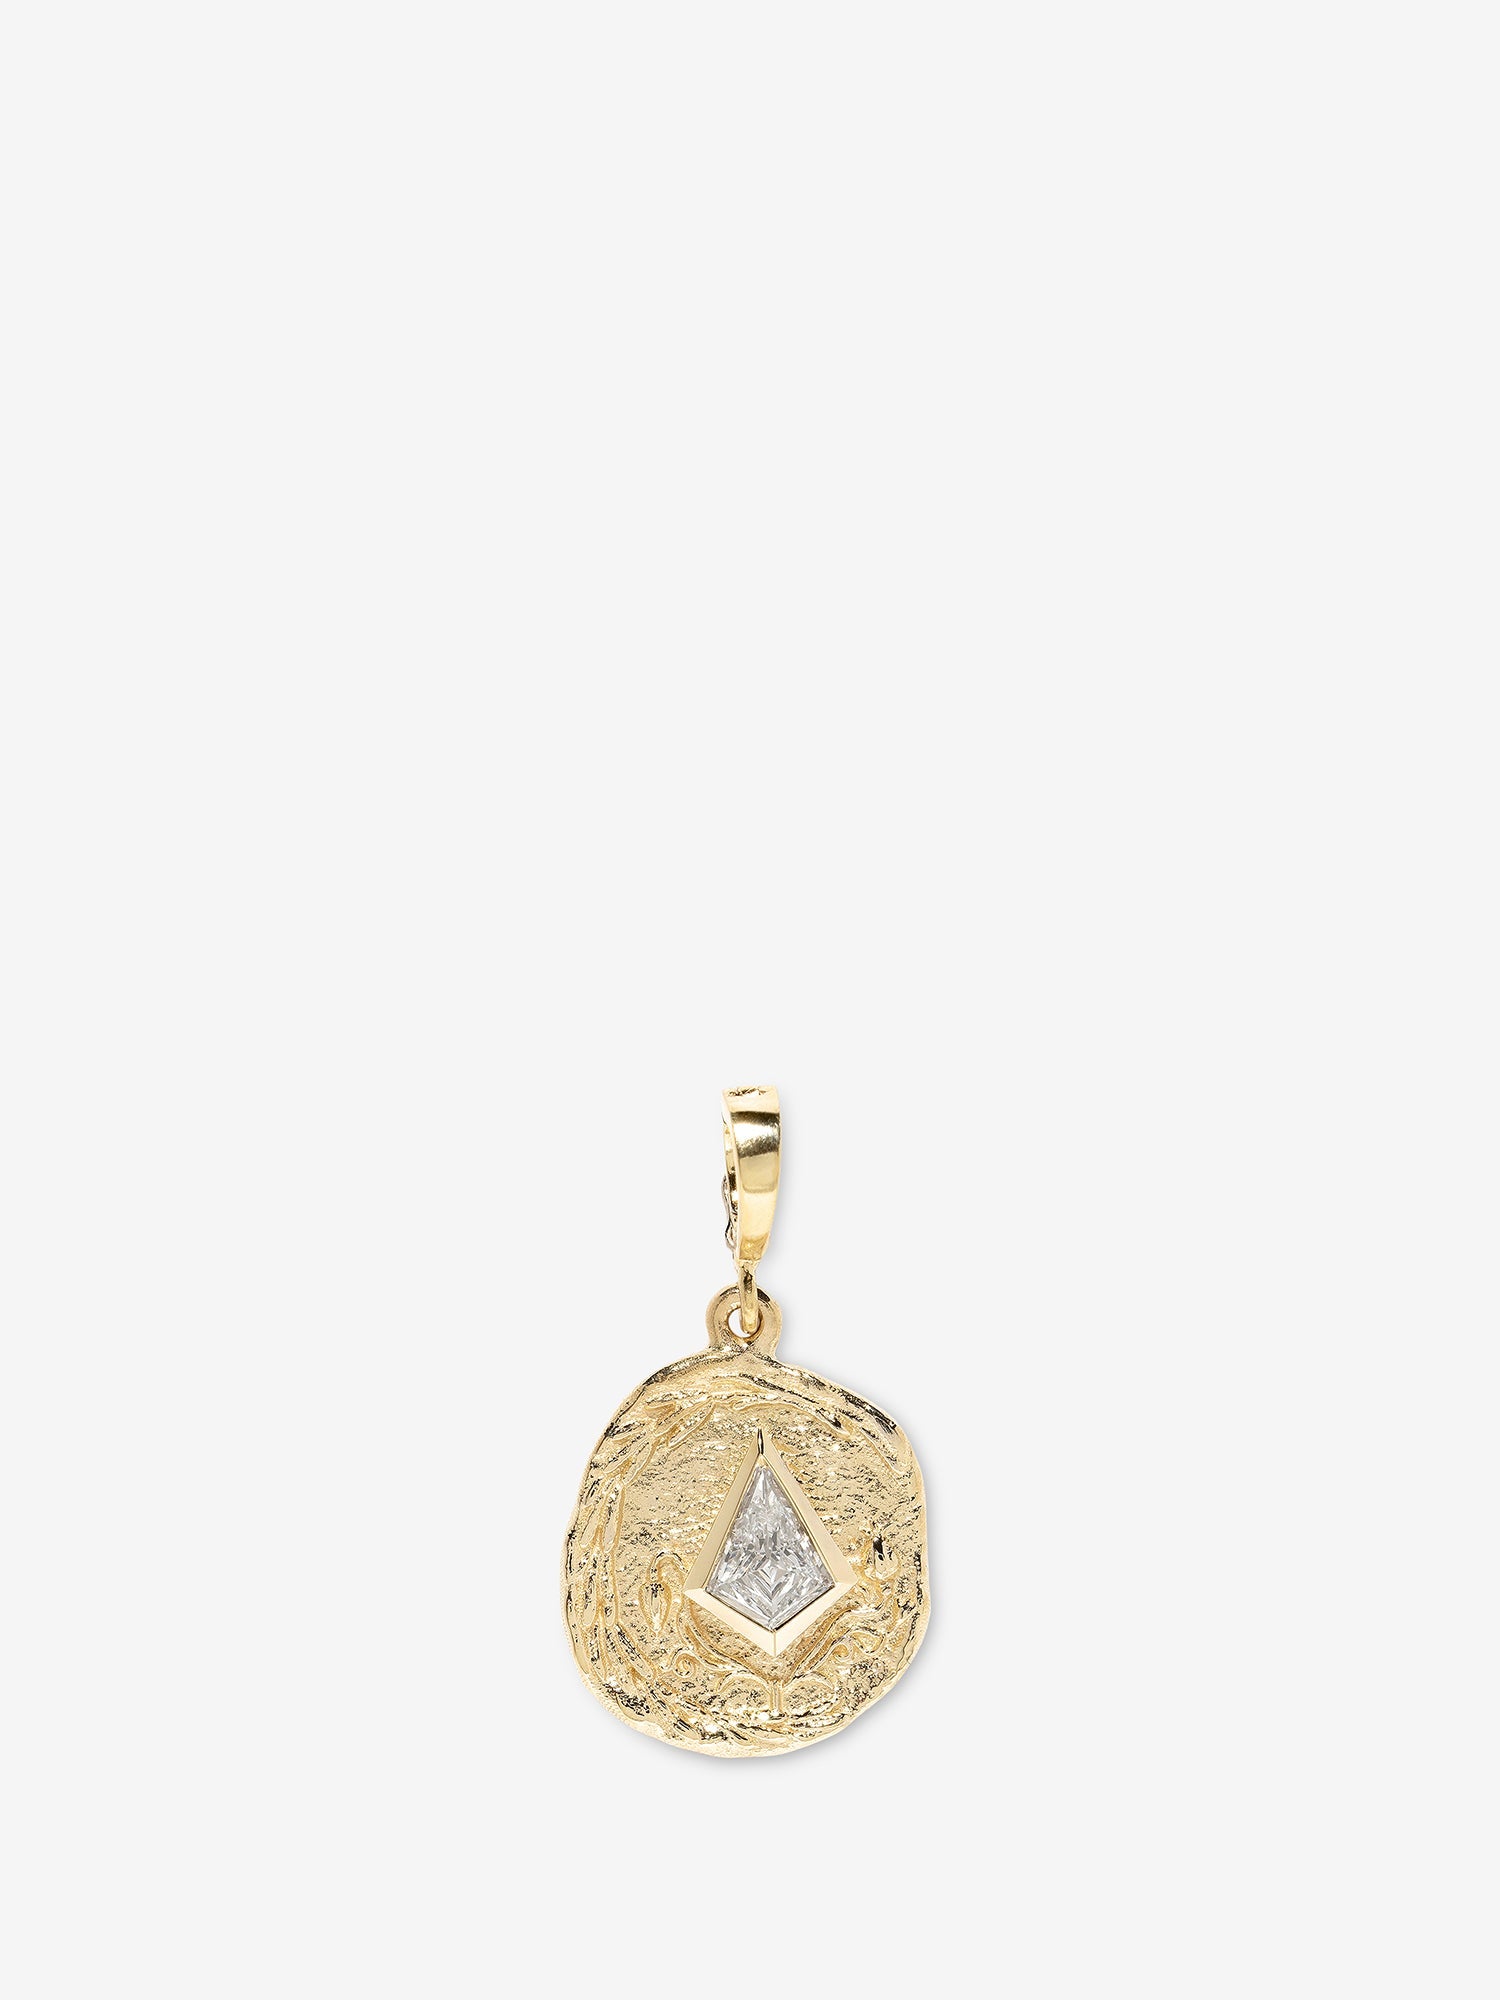 Olive Branch and Rose Bud Kite Diamond Coin Charm